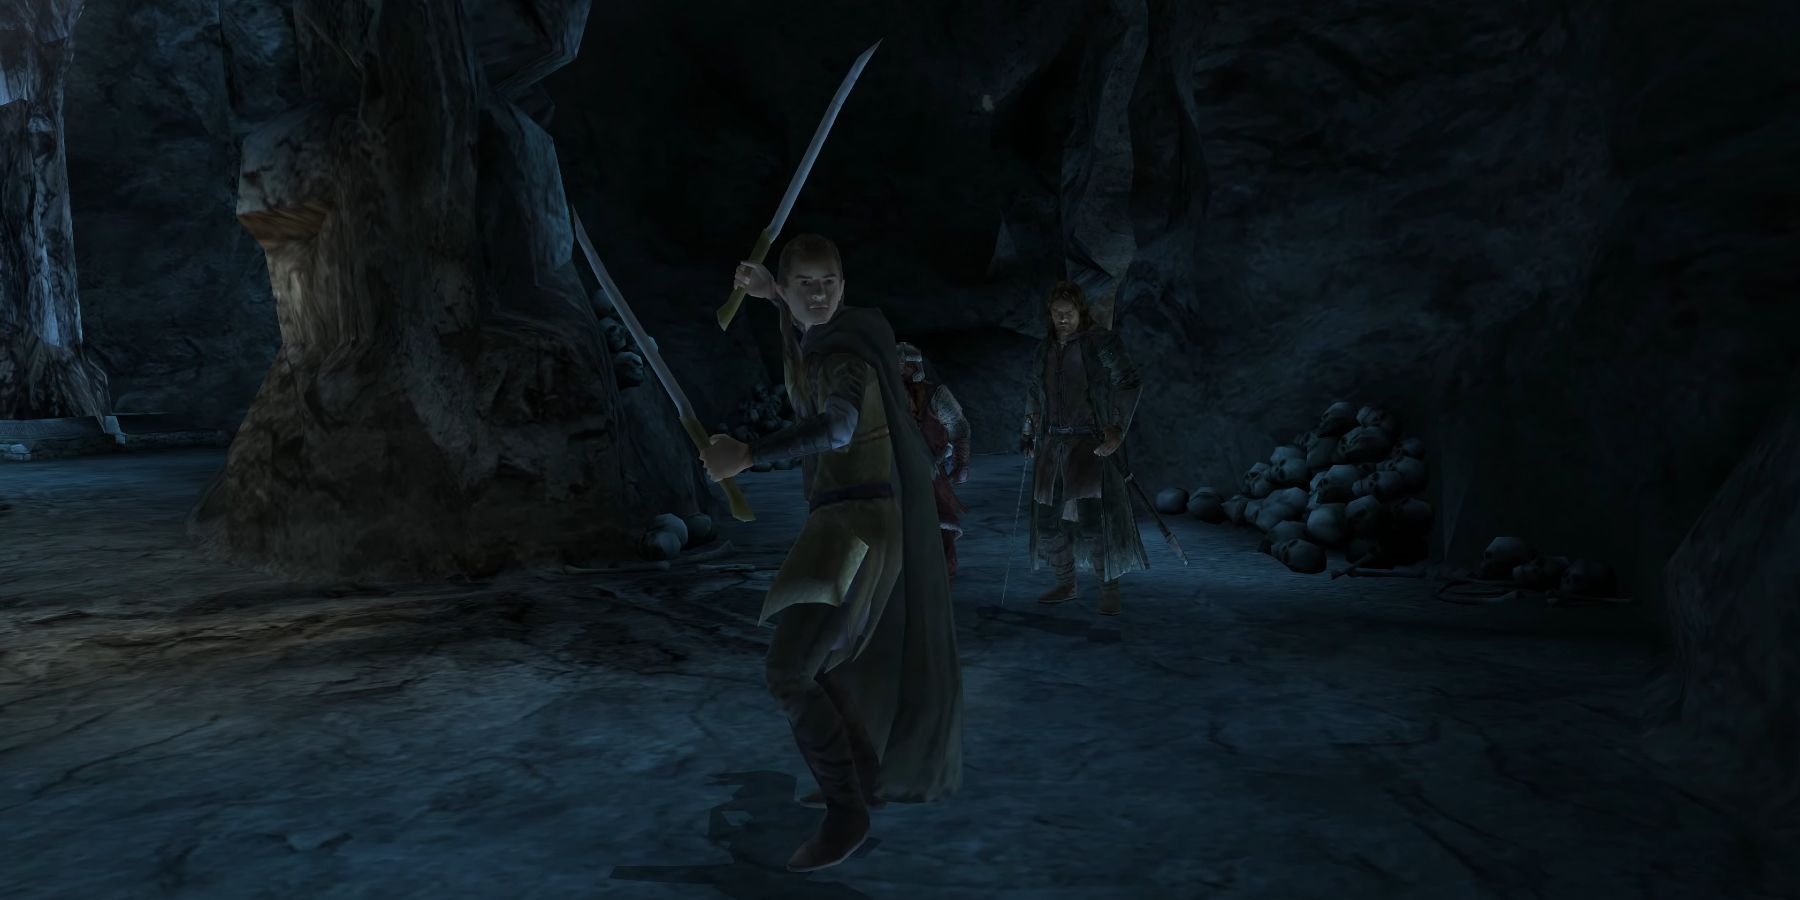 Legolas, Gimli, and Aragorn in the caverns beneath the Dwimorberg in The Lord Of The Rings: The Return Of The King